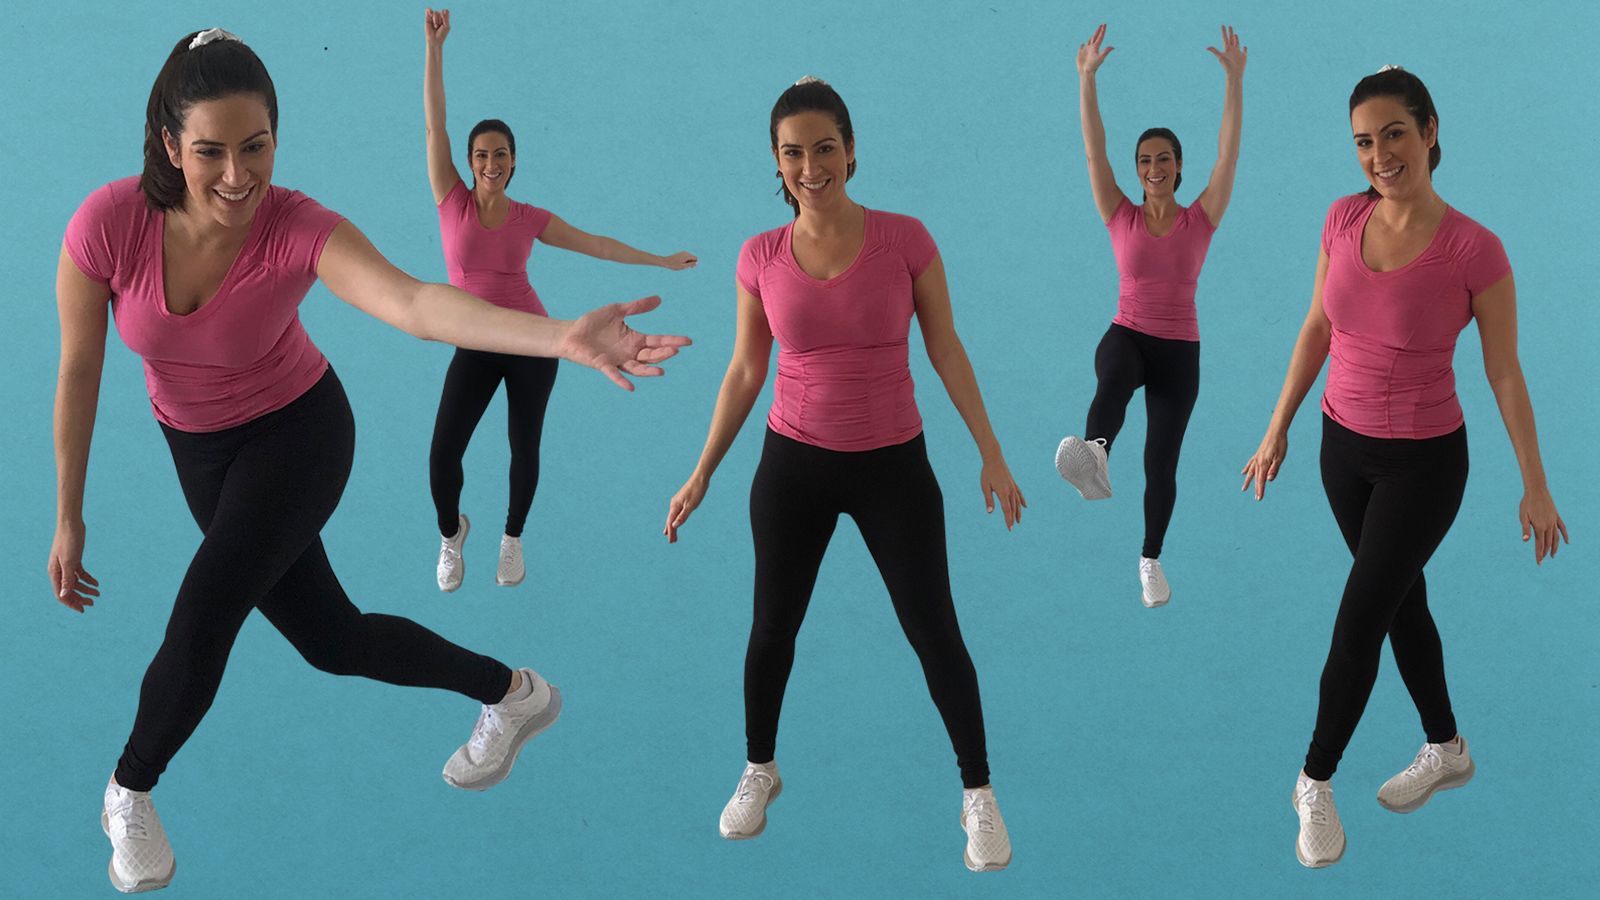 How to change up your workout with easy dance cardio moves